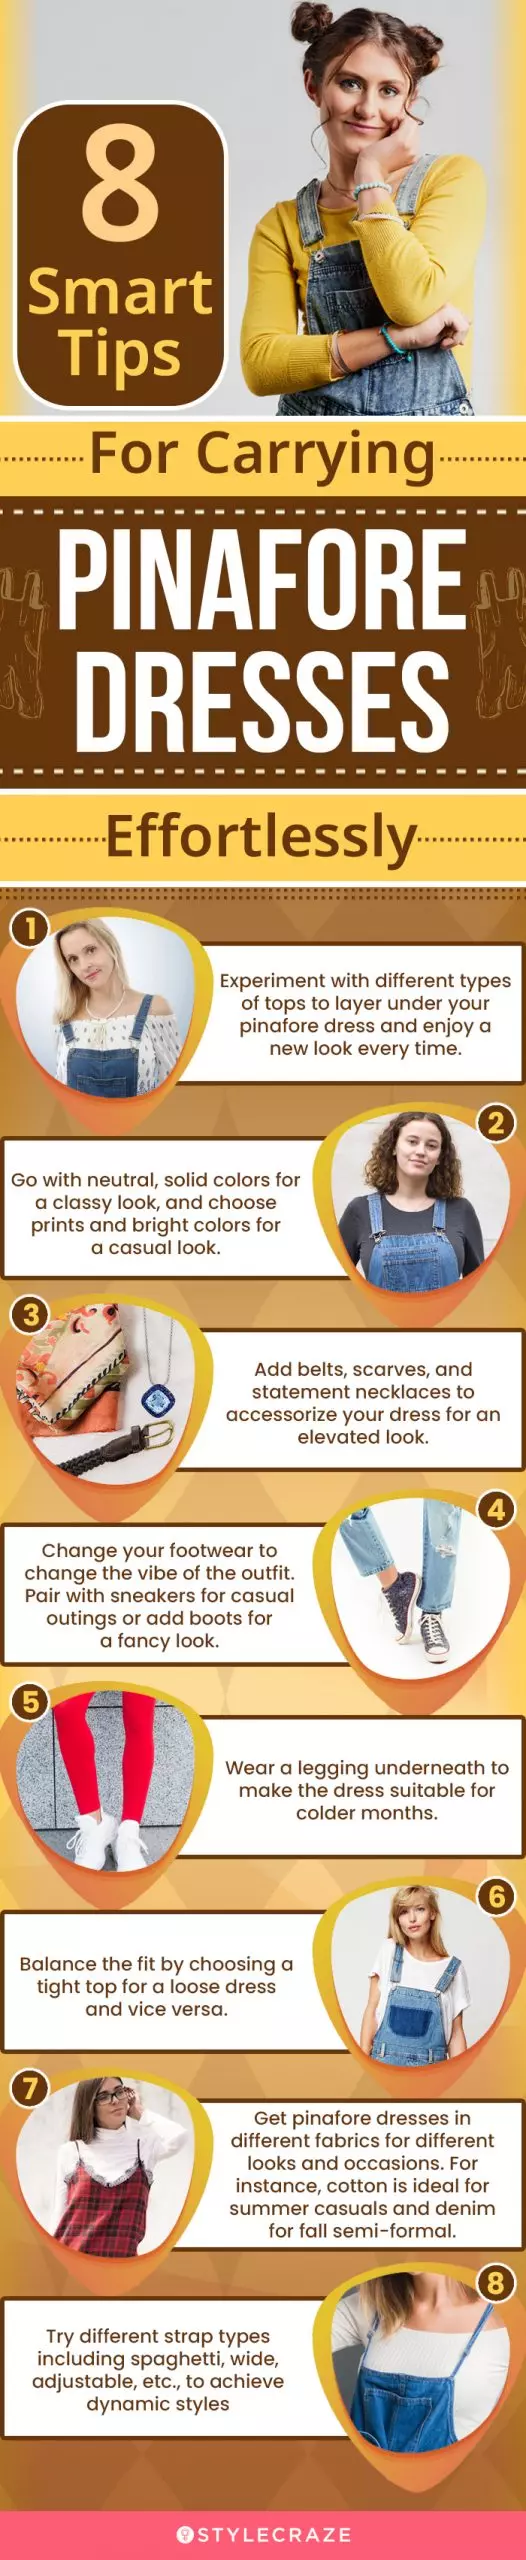 8 Smart Tips For Carrying Pinafore Dresses Effortlessly (infographic)